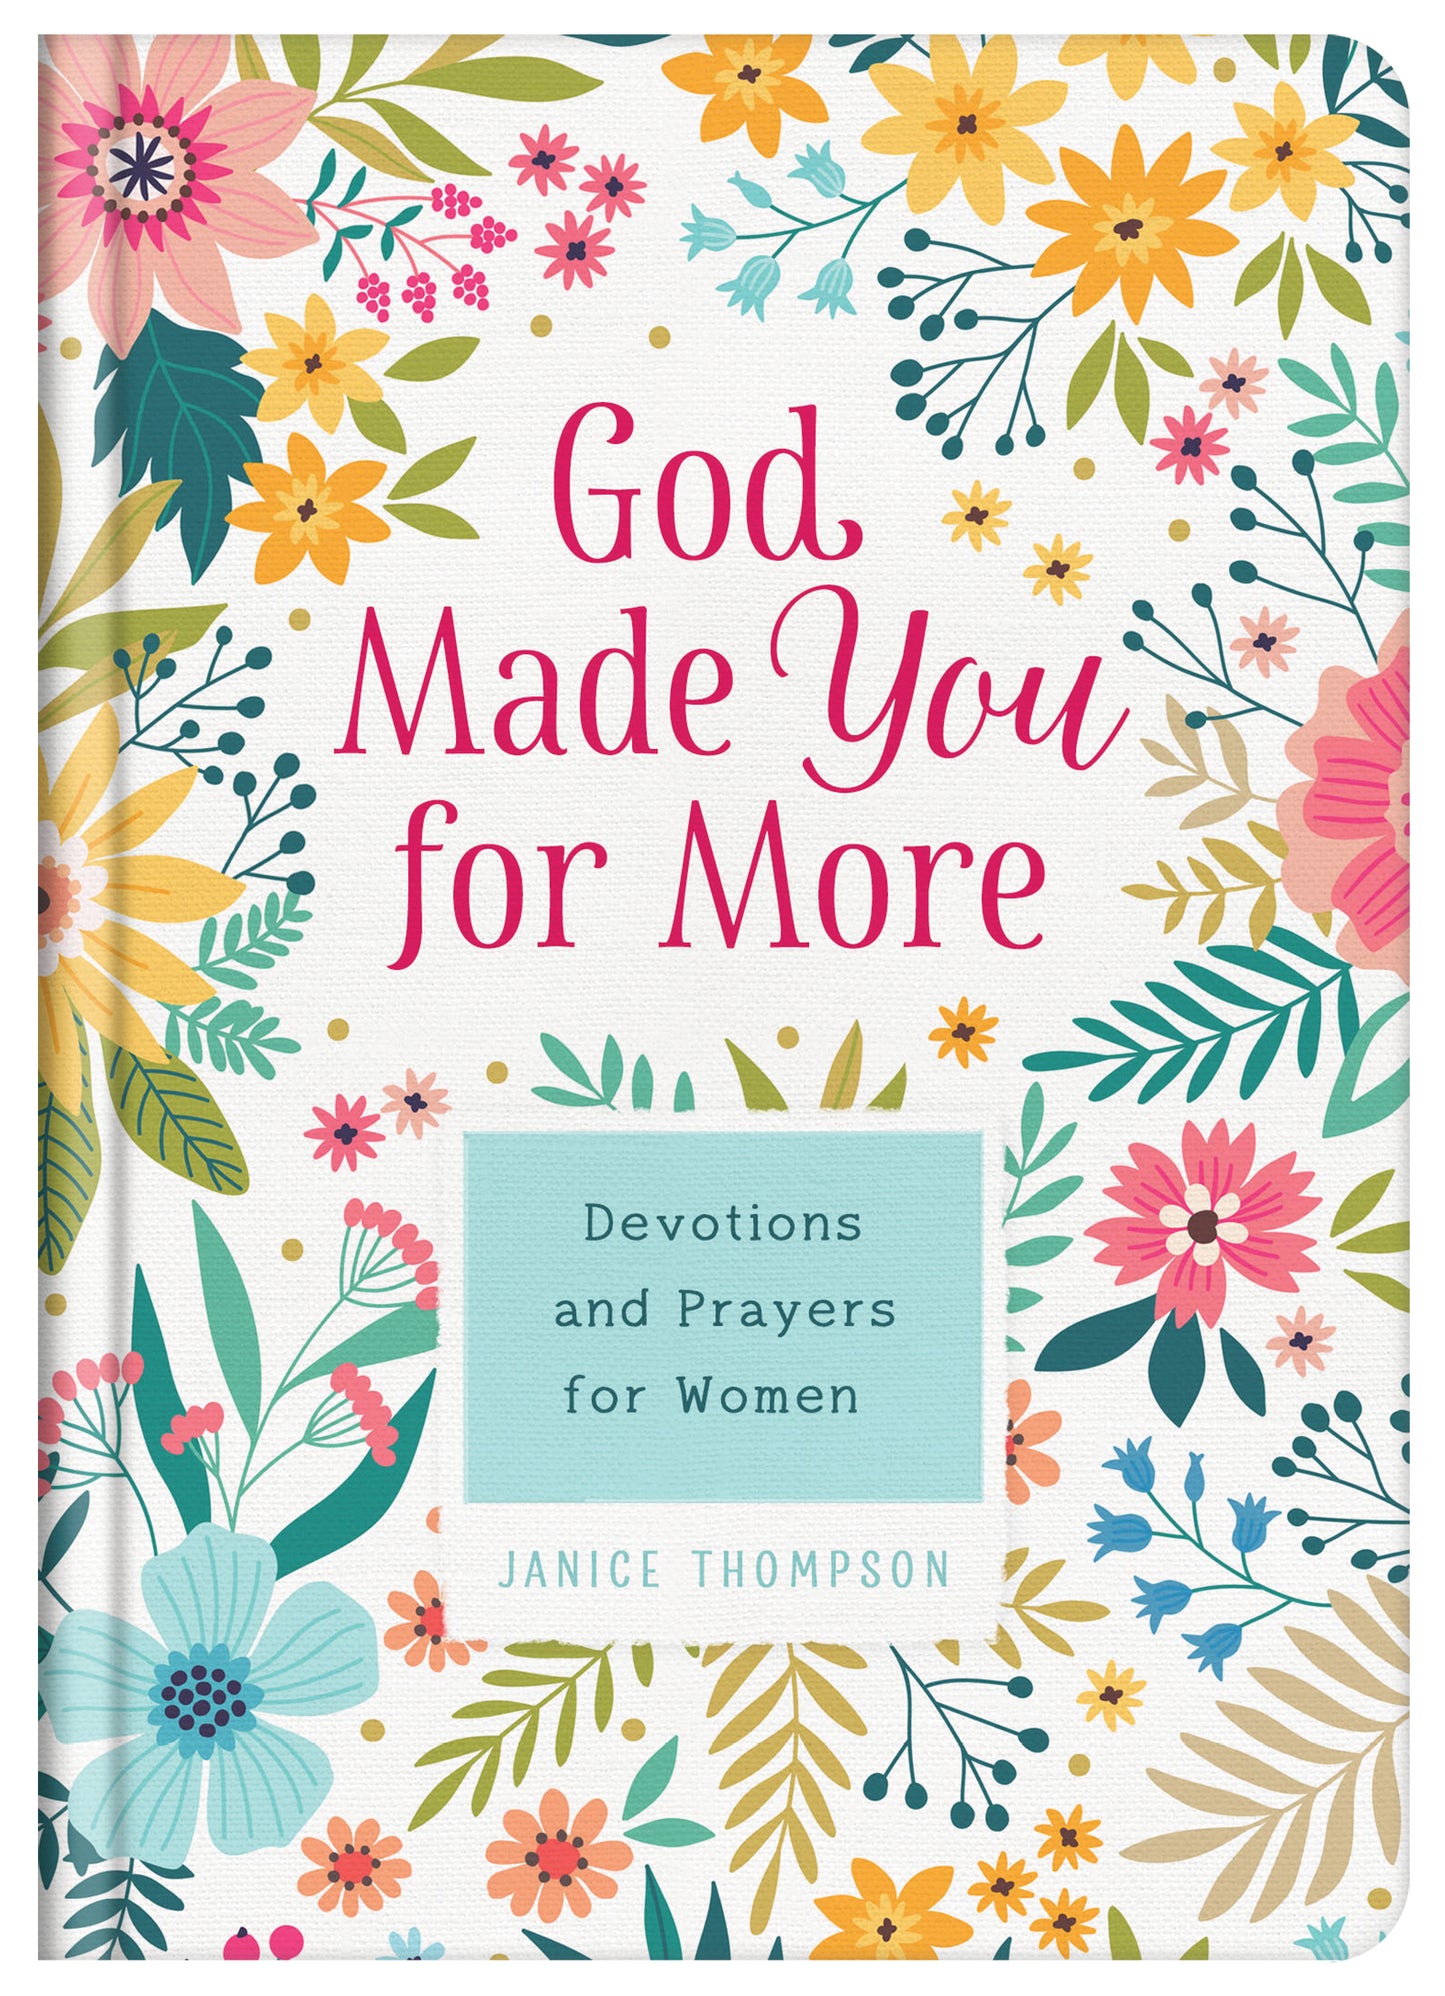 God Made You for More - The Christian Gift Company